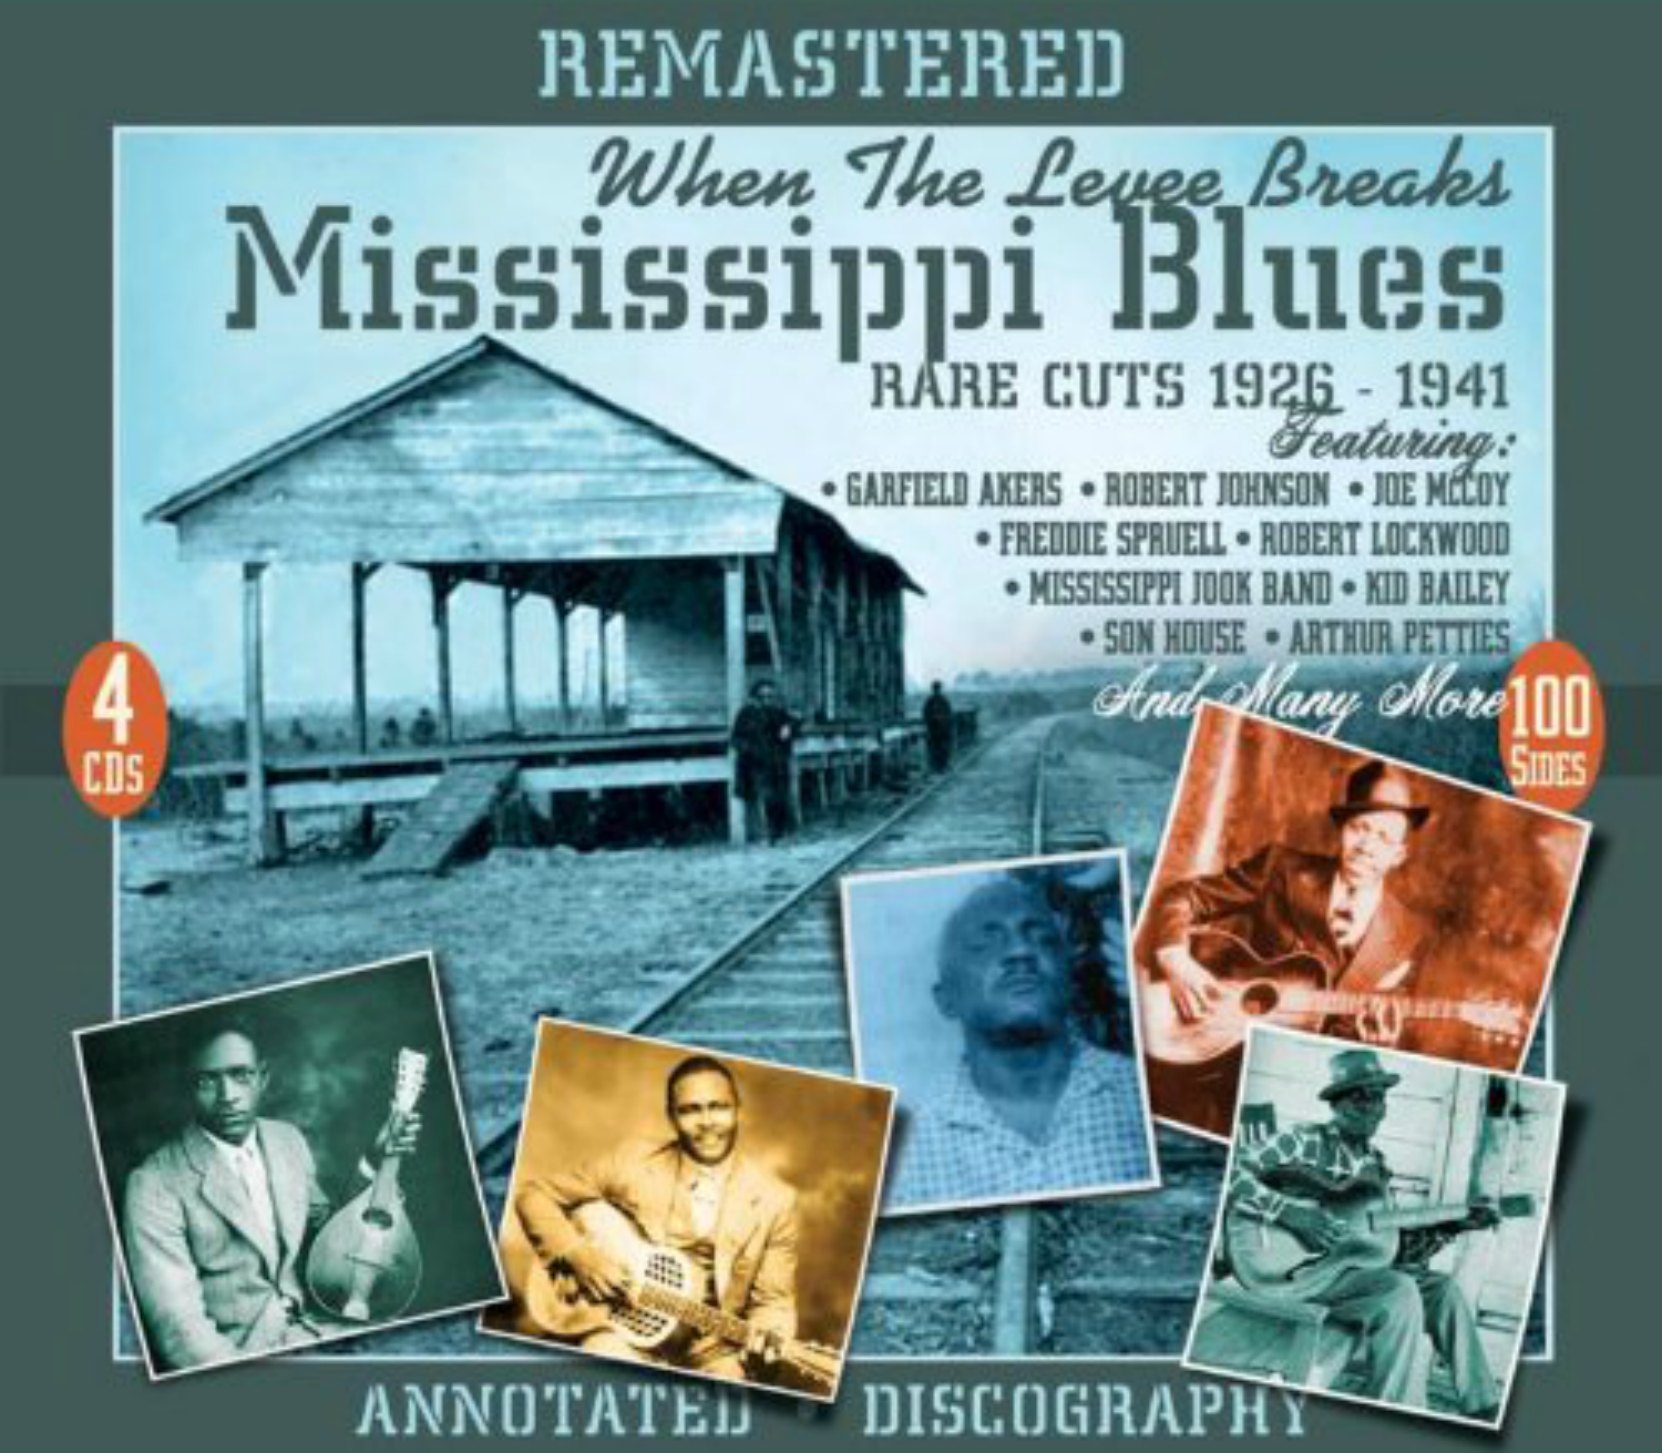 Mississippi Blues, Rare Cuts 1926-1941, When The Levee Breaks, on JSP Records. CD cover.